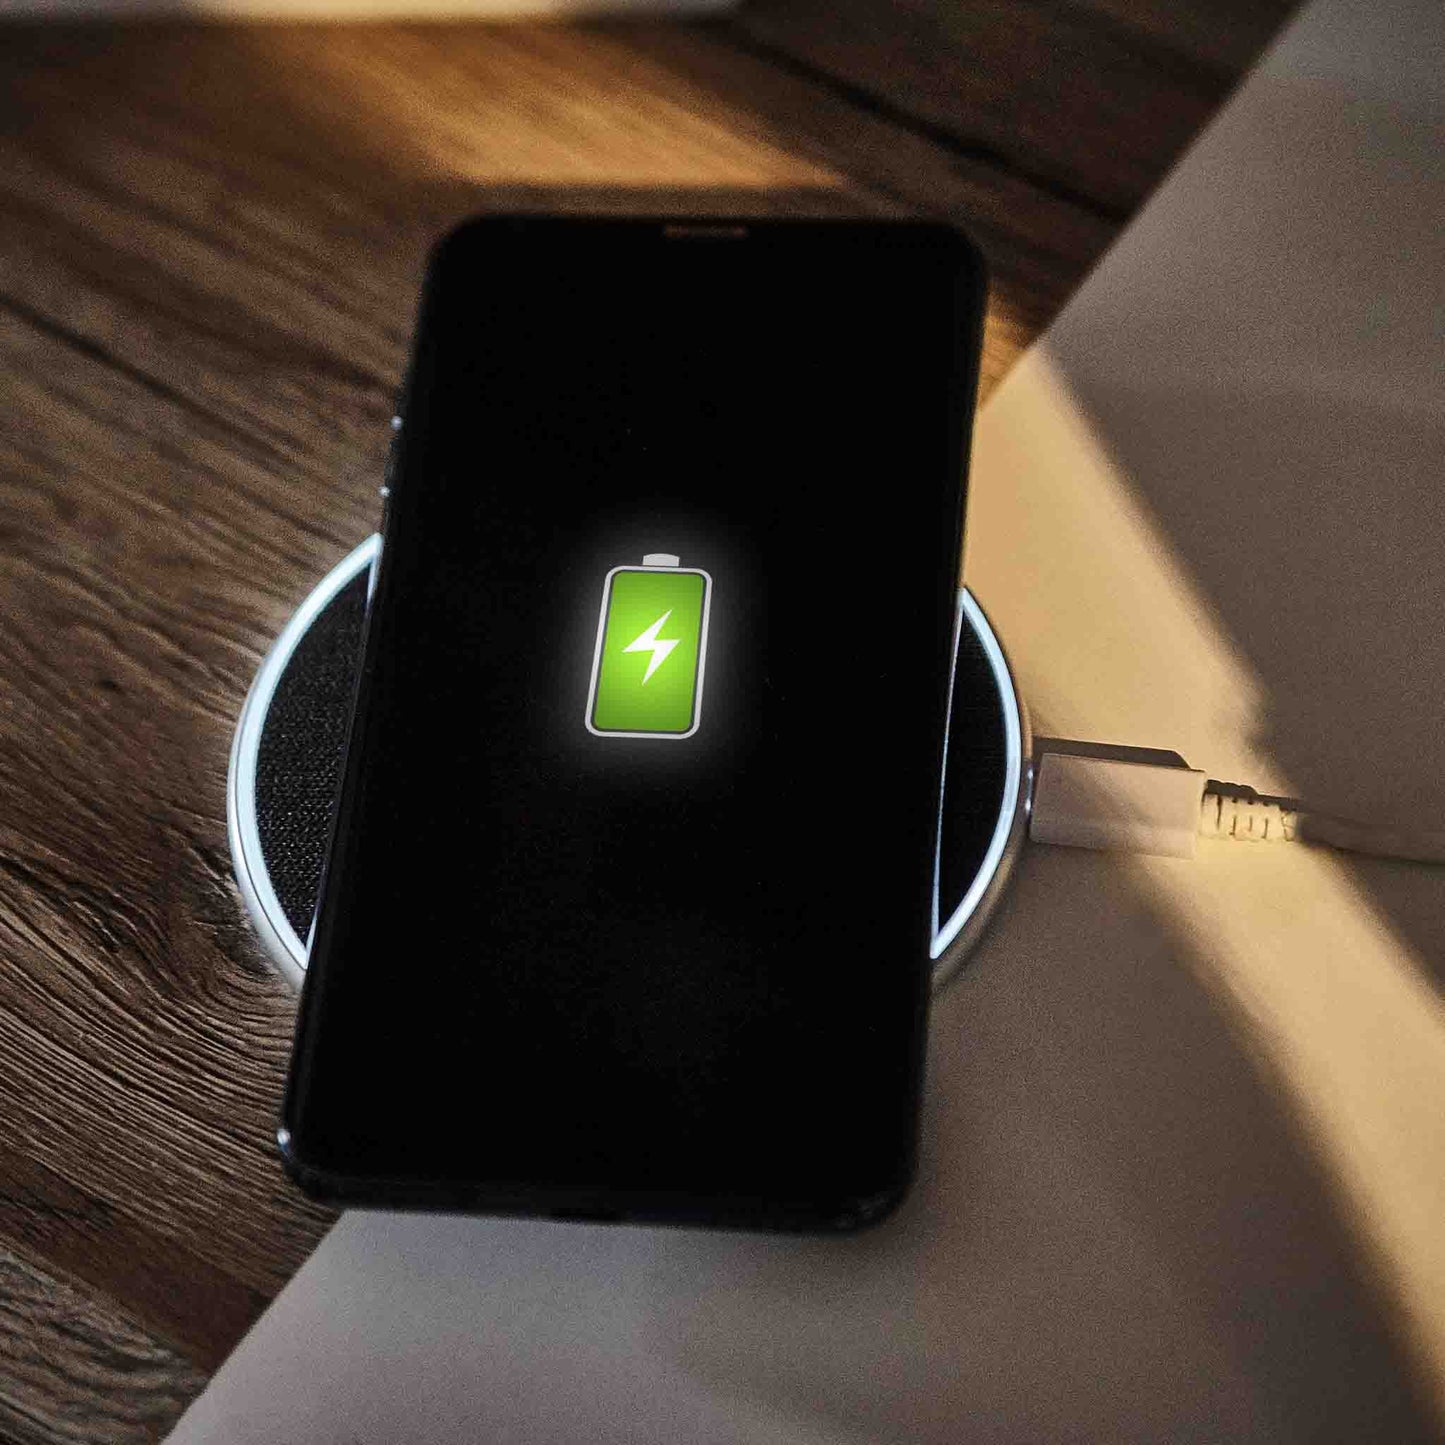 MagWire "classic" Wireless Charger